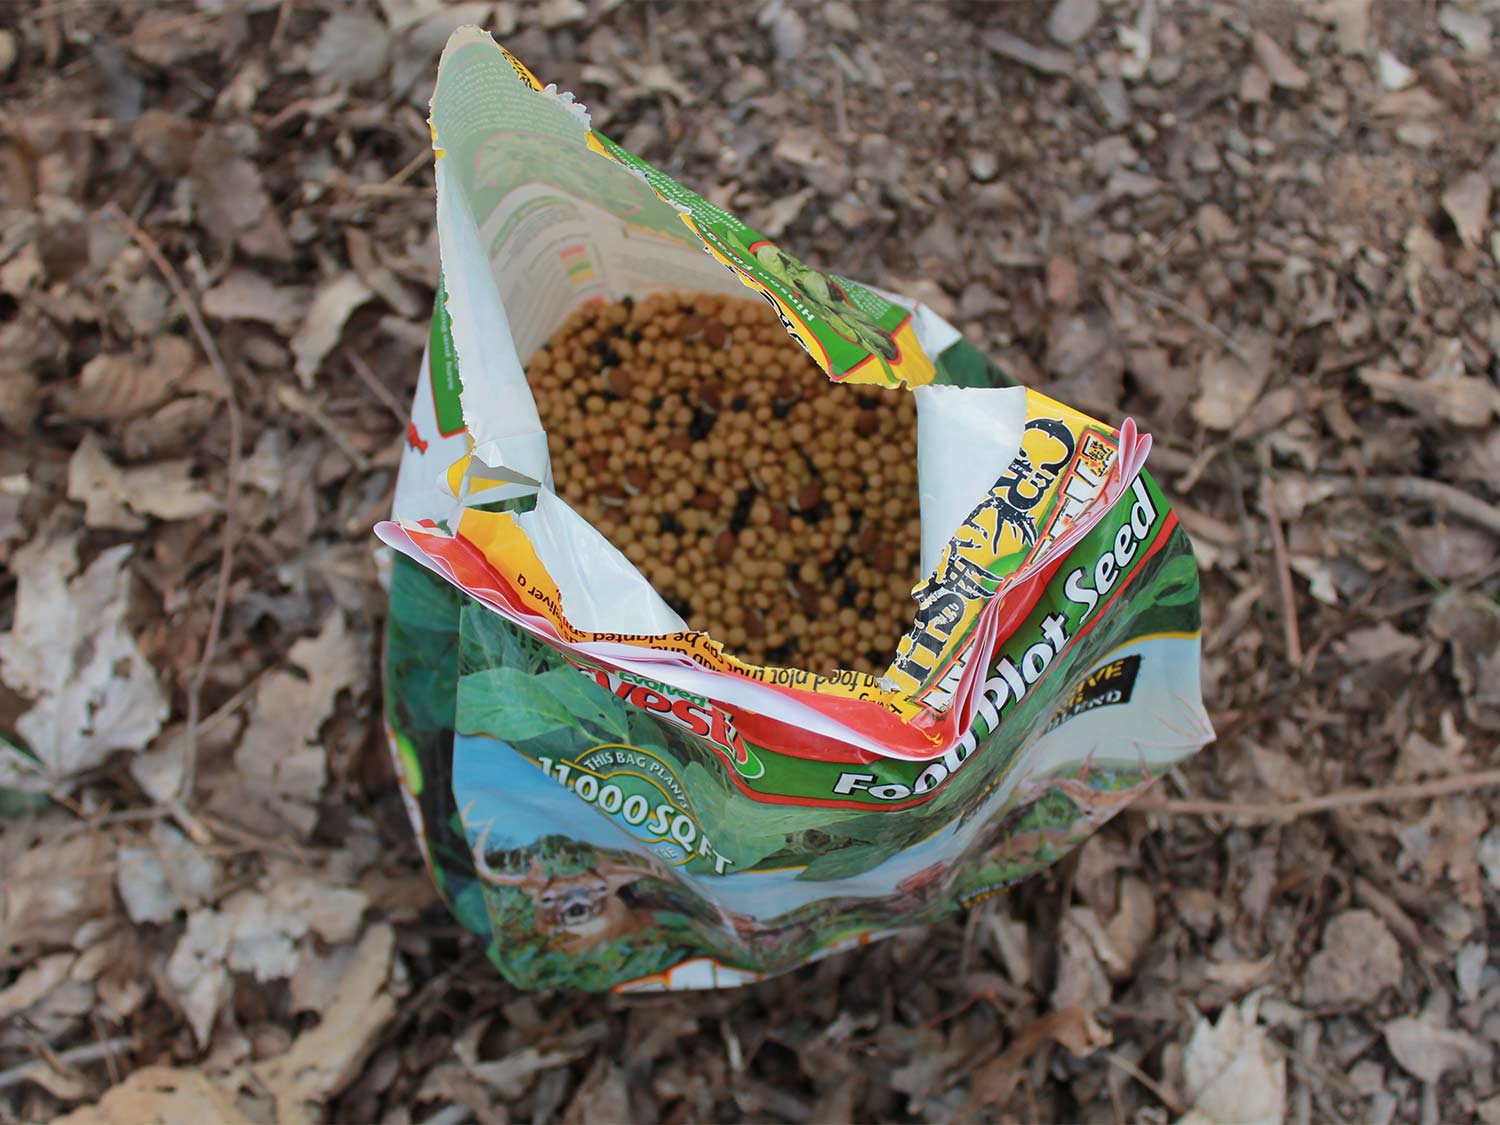 A bag of food plot seed on the ground.